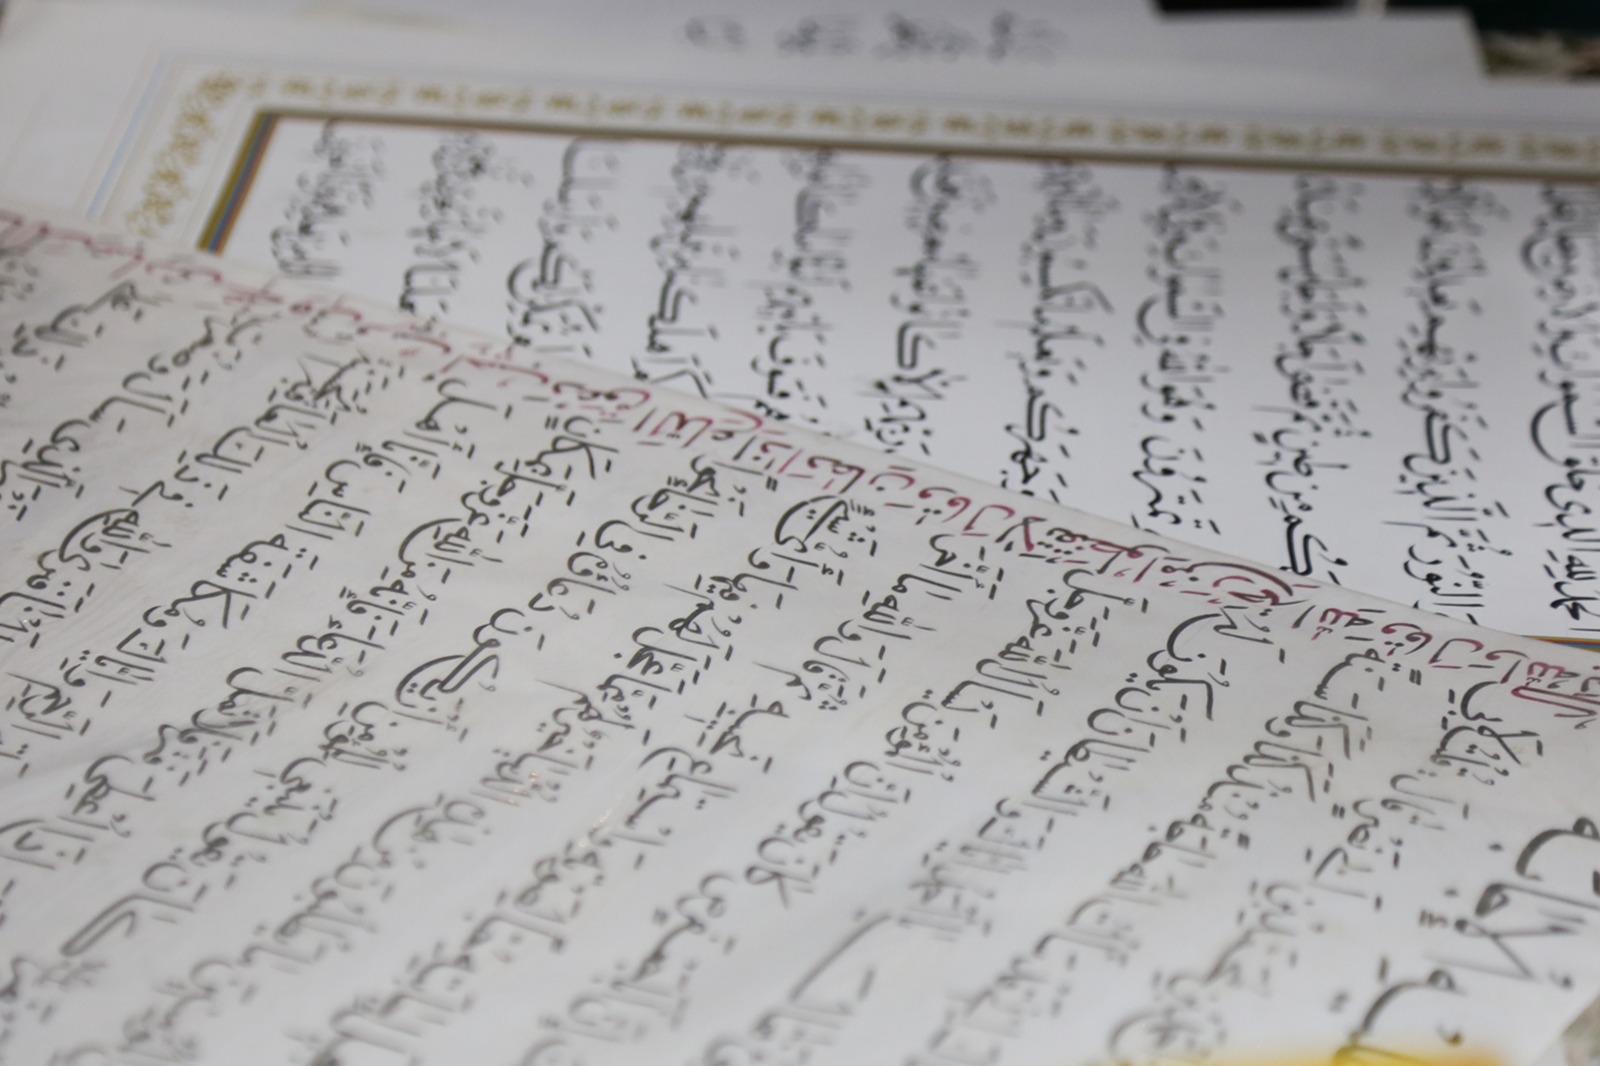 English clip of the report of the 9th Quran and Atrat exhibition